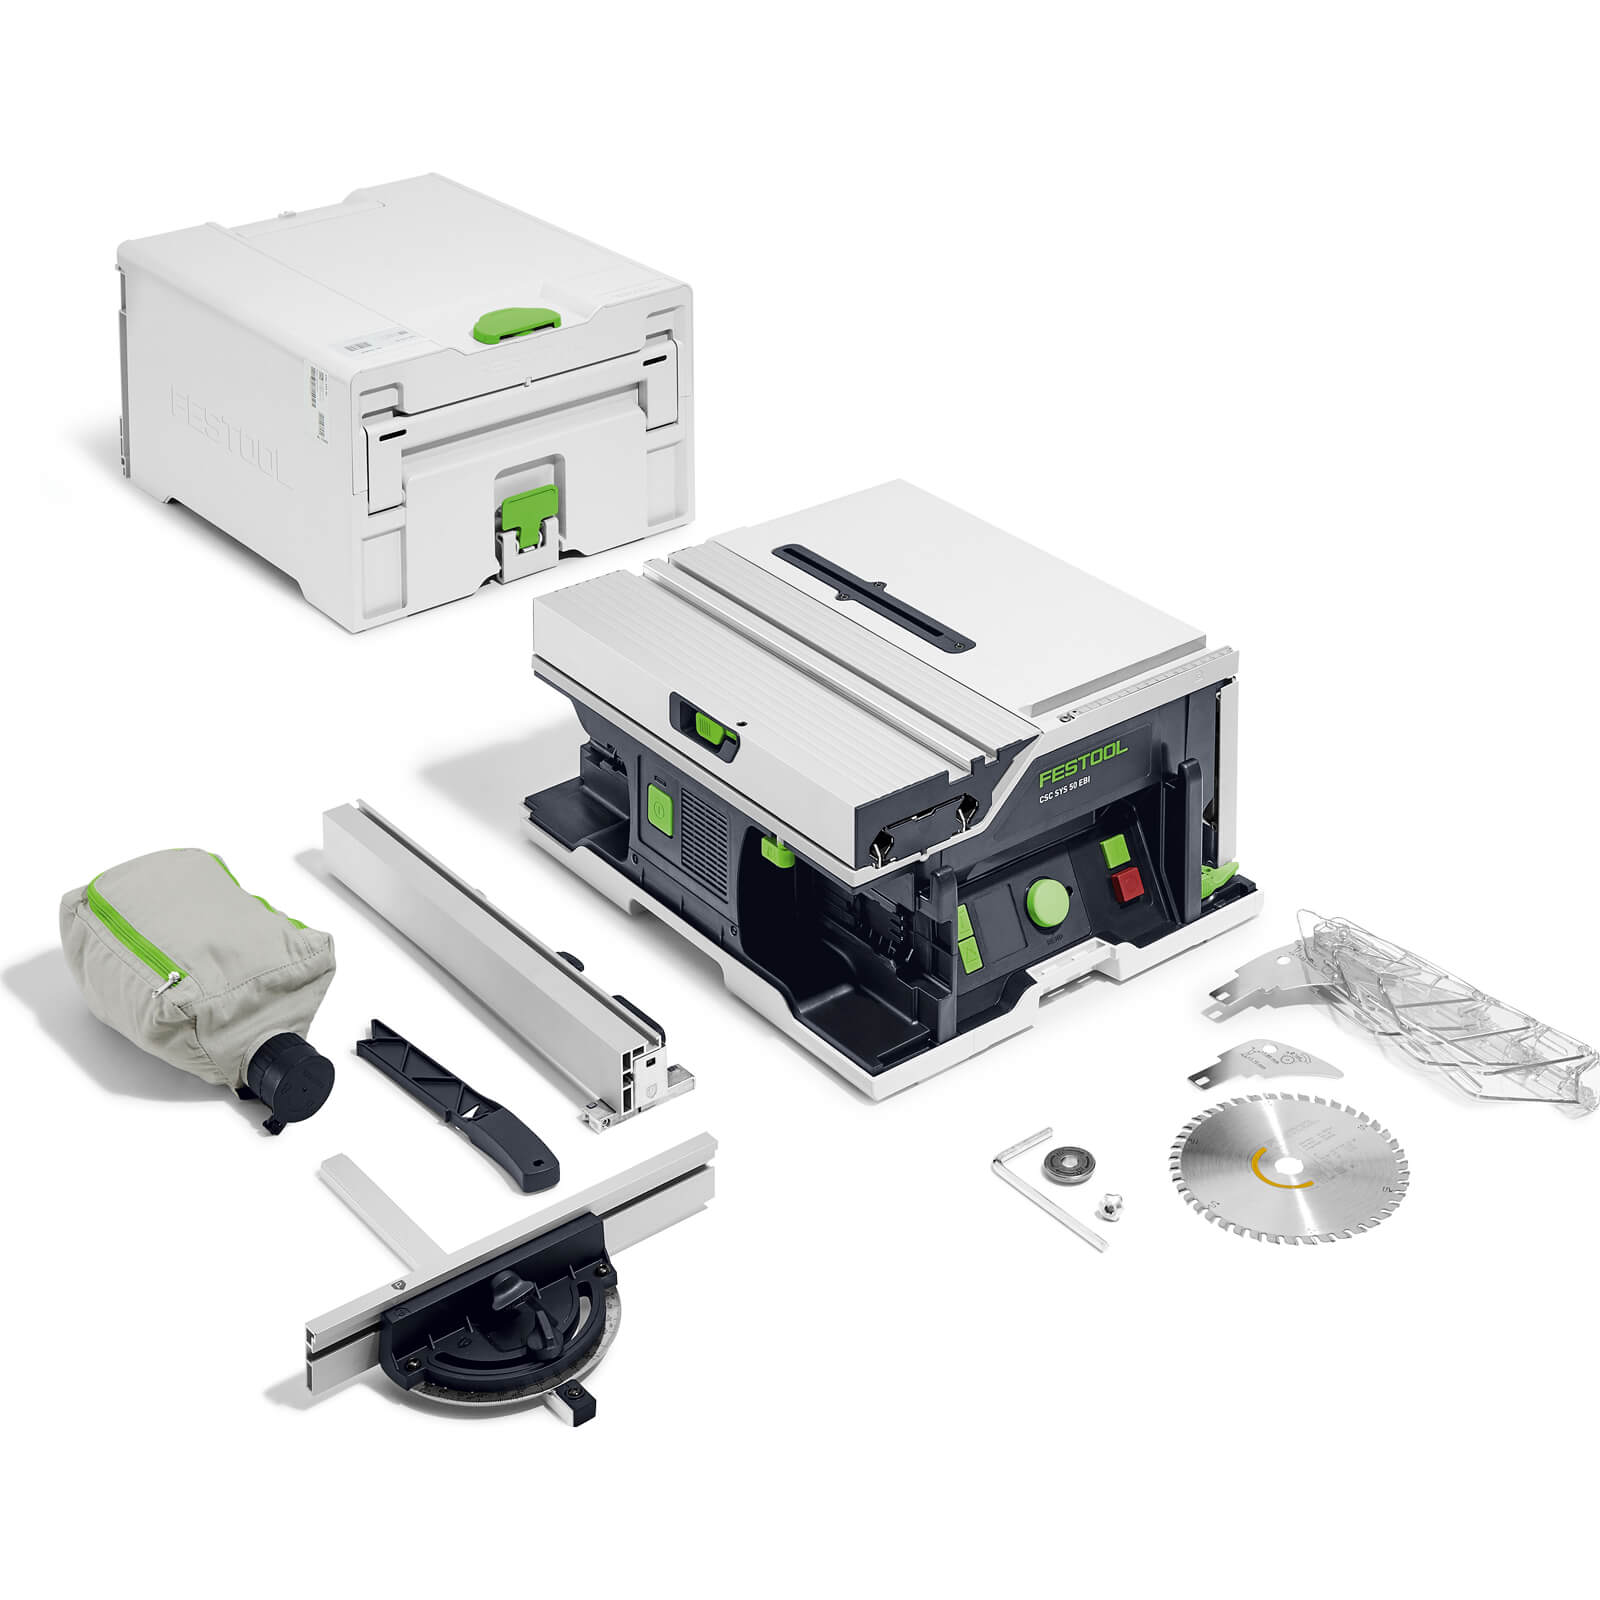 Festool CSC SYS 50 EBI Brushless Precison Table Saw No Batteries No Charger Case